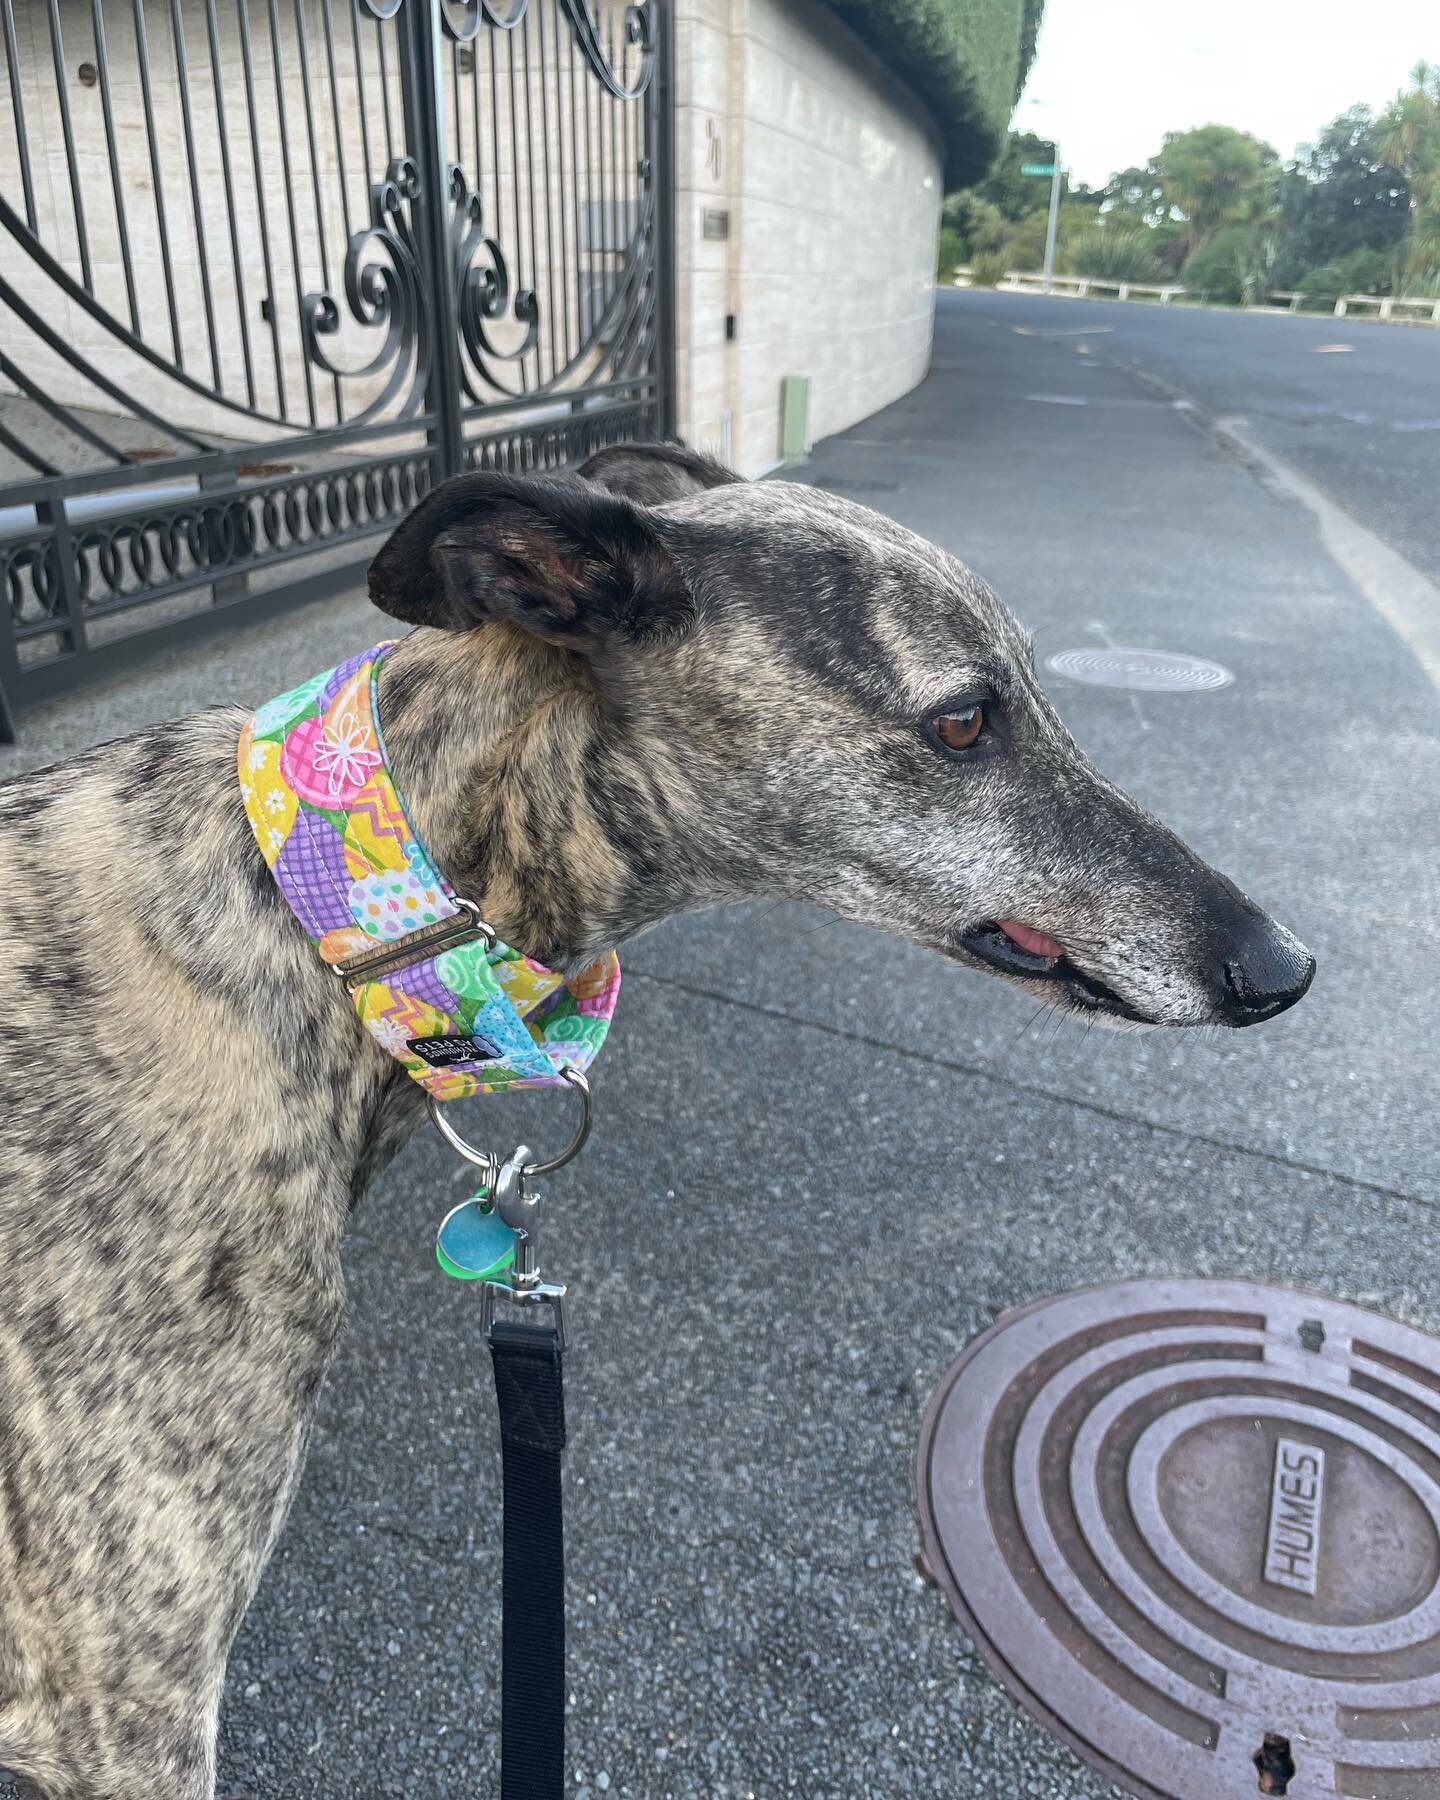 Happy #easter to all you bunnies out there 🐰 (I&rsquo;m wearing a special easter egg collar today) - excuse derp 🐾 💜 @greyhoundsaspetsnz